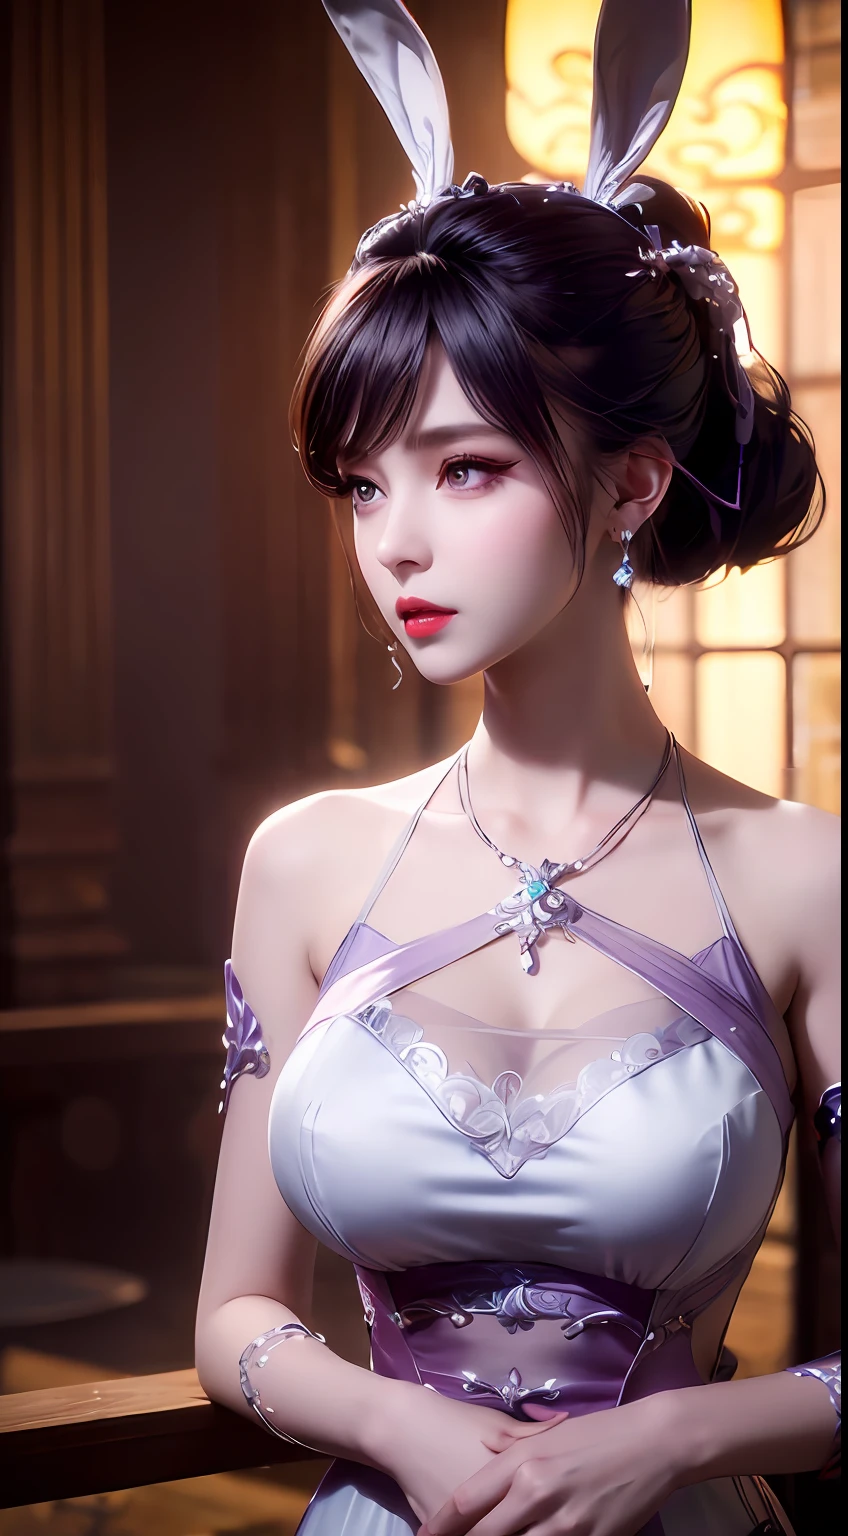 1 beautiful girl in Han costume, thin purple silk shirt with many white motifs, white lace top, long silver-purple ponytail, gorgeous hair jewelry, earring jewelry, purple rabbit ears pale, necklace jewelry, big purple eyes meticulously drawn, meticulous makeup, thin eyebrows, high nose, pretty red lips, no smile, pursed lips, rosy cheeks, enlarged breasts, huge breasts, round a well-proportioned, slim waist, purple mesh socks, Chinese hanfu style, fictional art textures, vivid and realistic colors, RAW photos, real photos, ultra high quality 8k surreal photos, ( magic light effect: 1.8), 10x pixels, magic effect (background): 1.8), super detailed eyes, girl portrait, girl alone, ancient hanfu background, 8k quality, UHD, HDR10, super sharp, the most detailed and clear picture, bright colors, even lighting, detailed dark background,